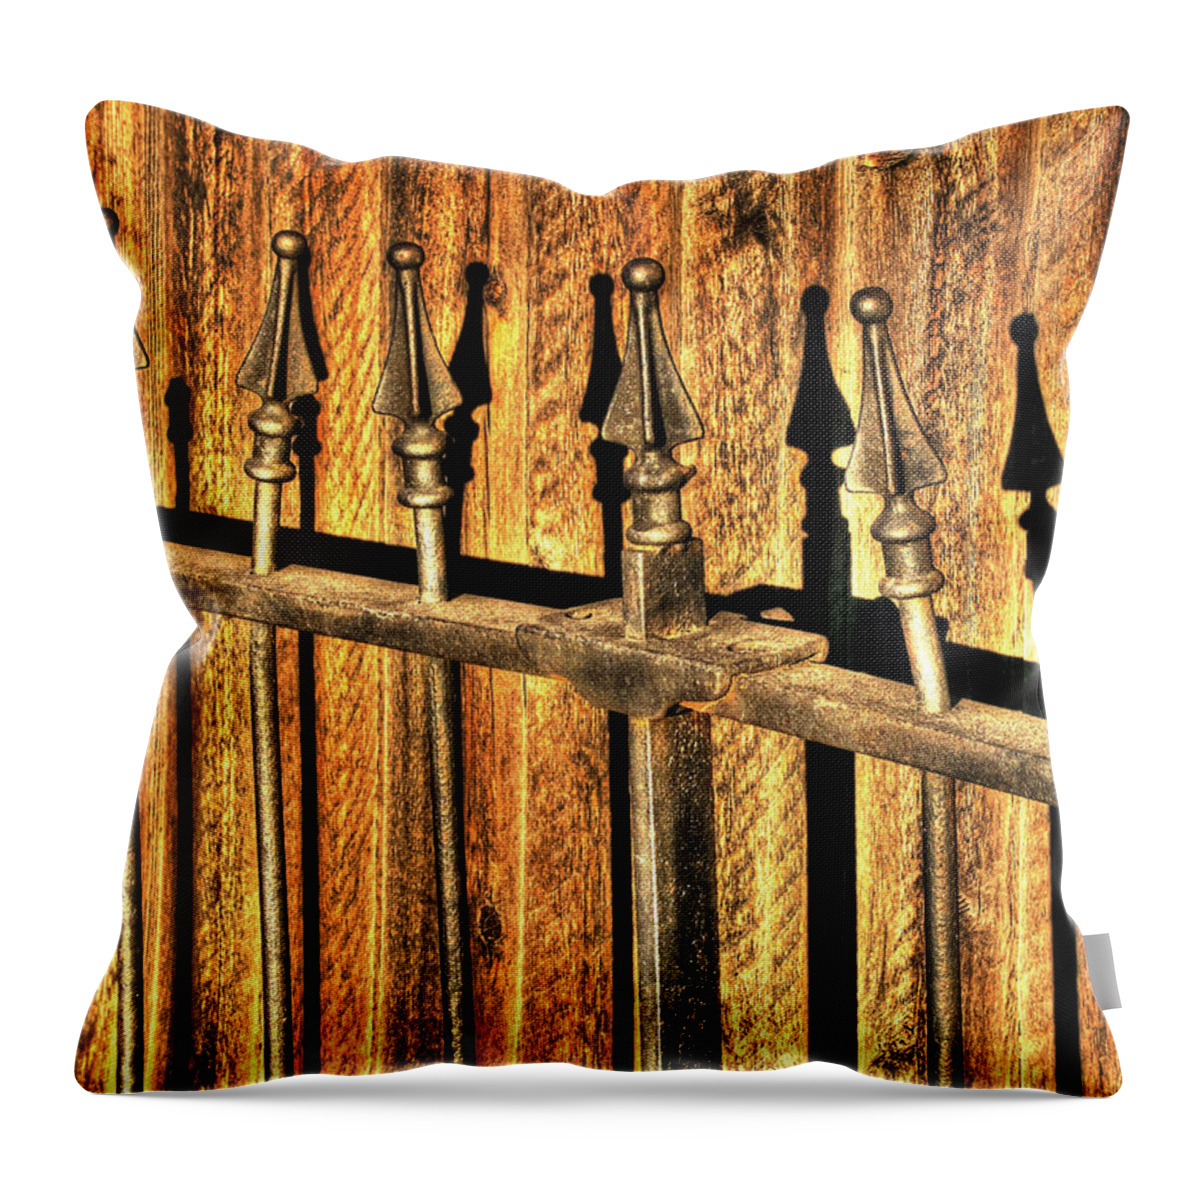 Rustic Throw Pillow featuring the photograph Missing One by Craig Burgwardt